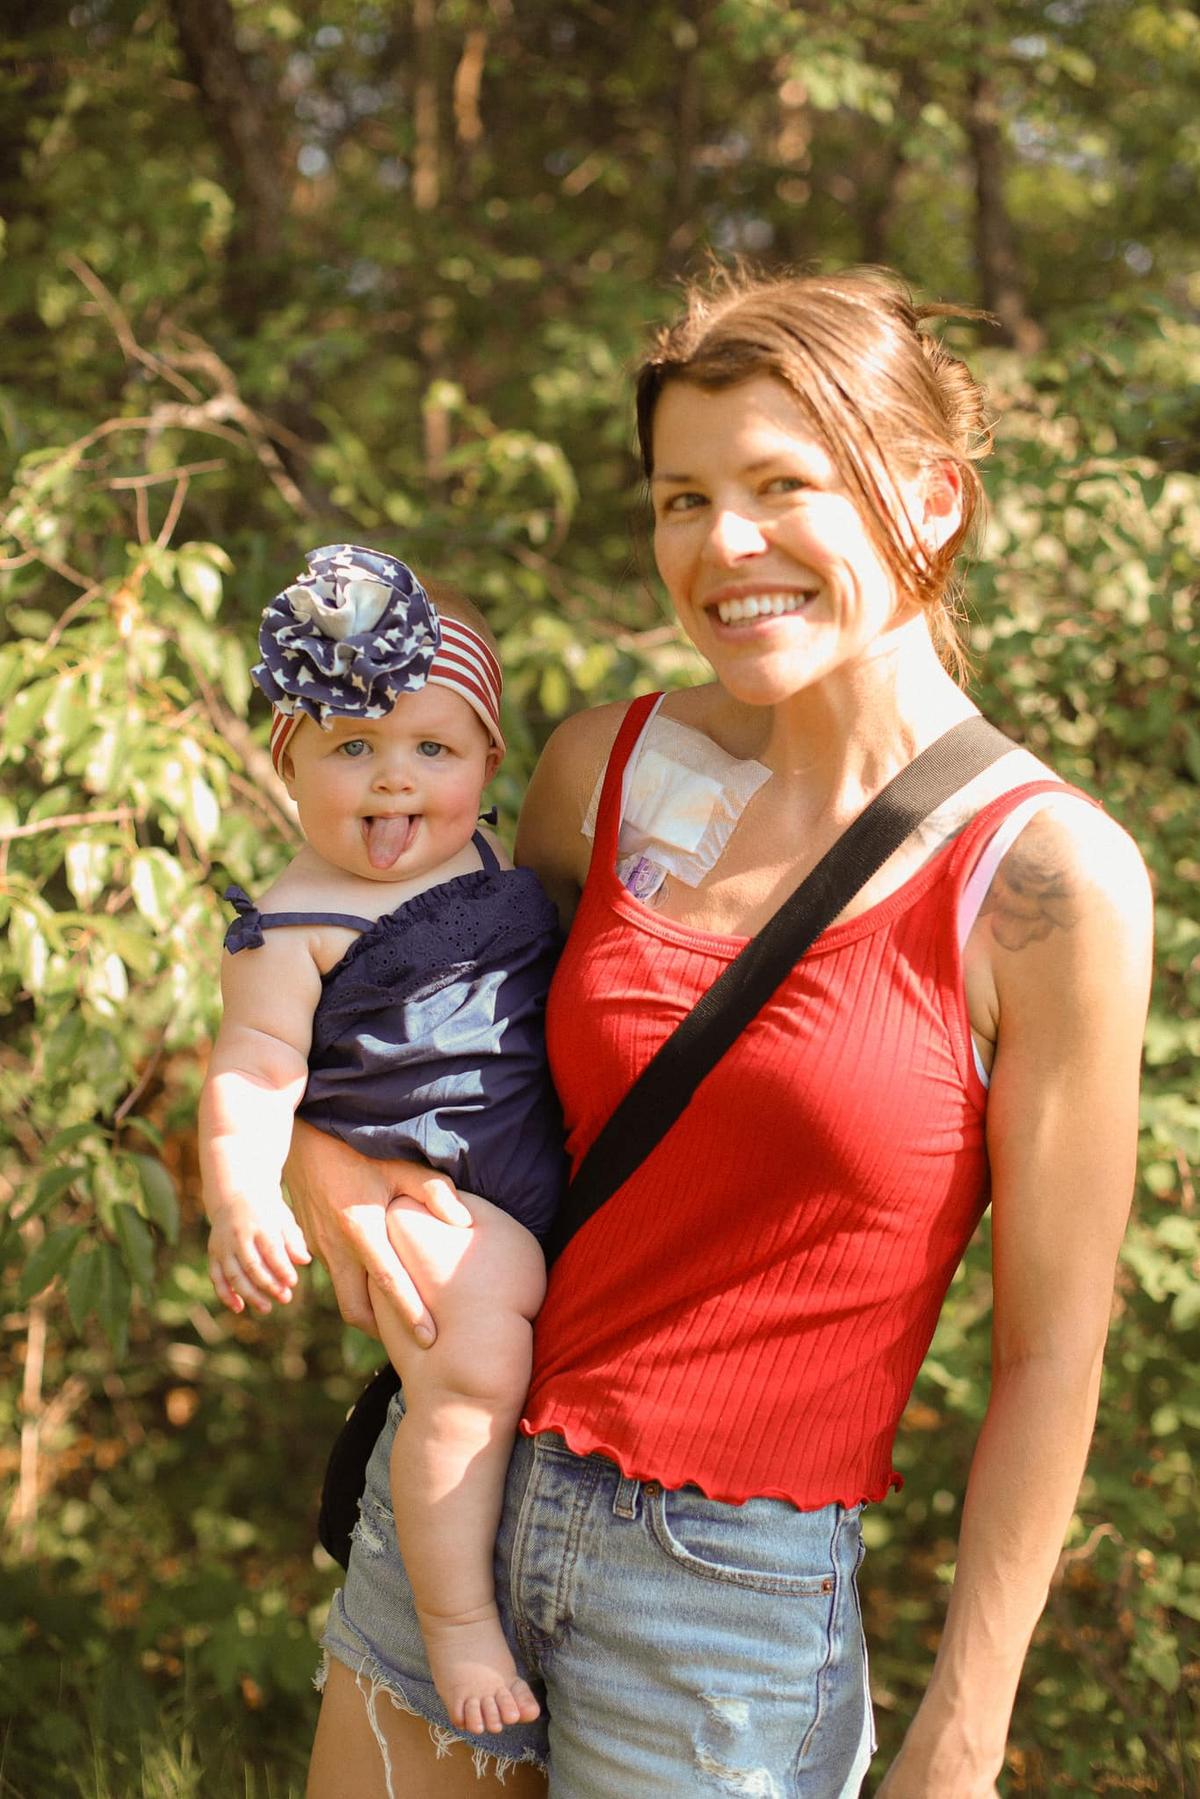 Mrs. Kann with her daughter, Gracey (Courtesy of <a href="https://www.facebook.com/profile.php?id=100093423486061">Tasha Kann</a>)